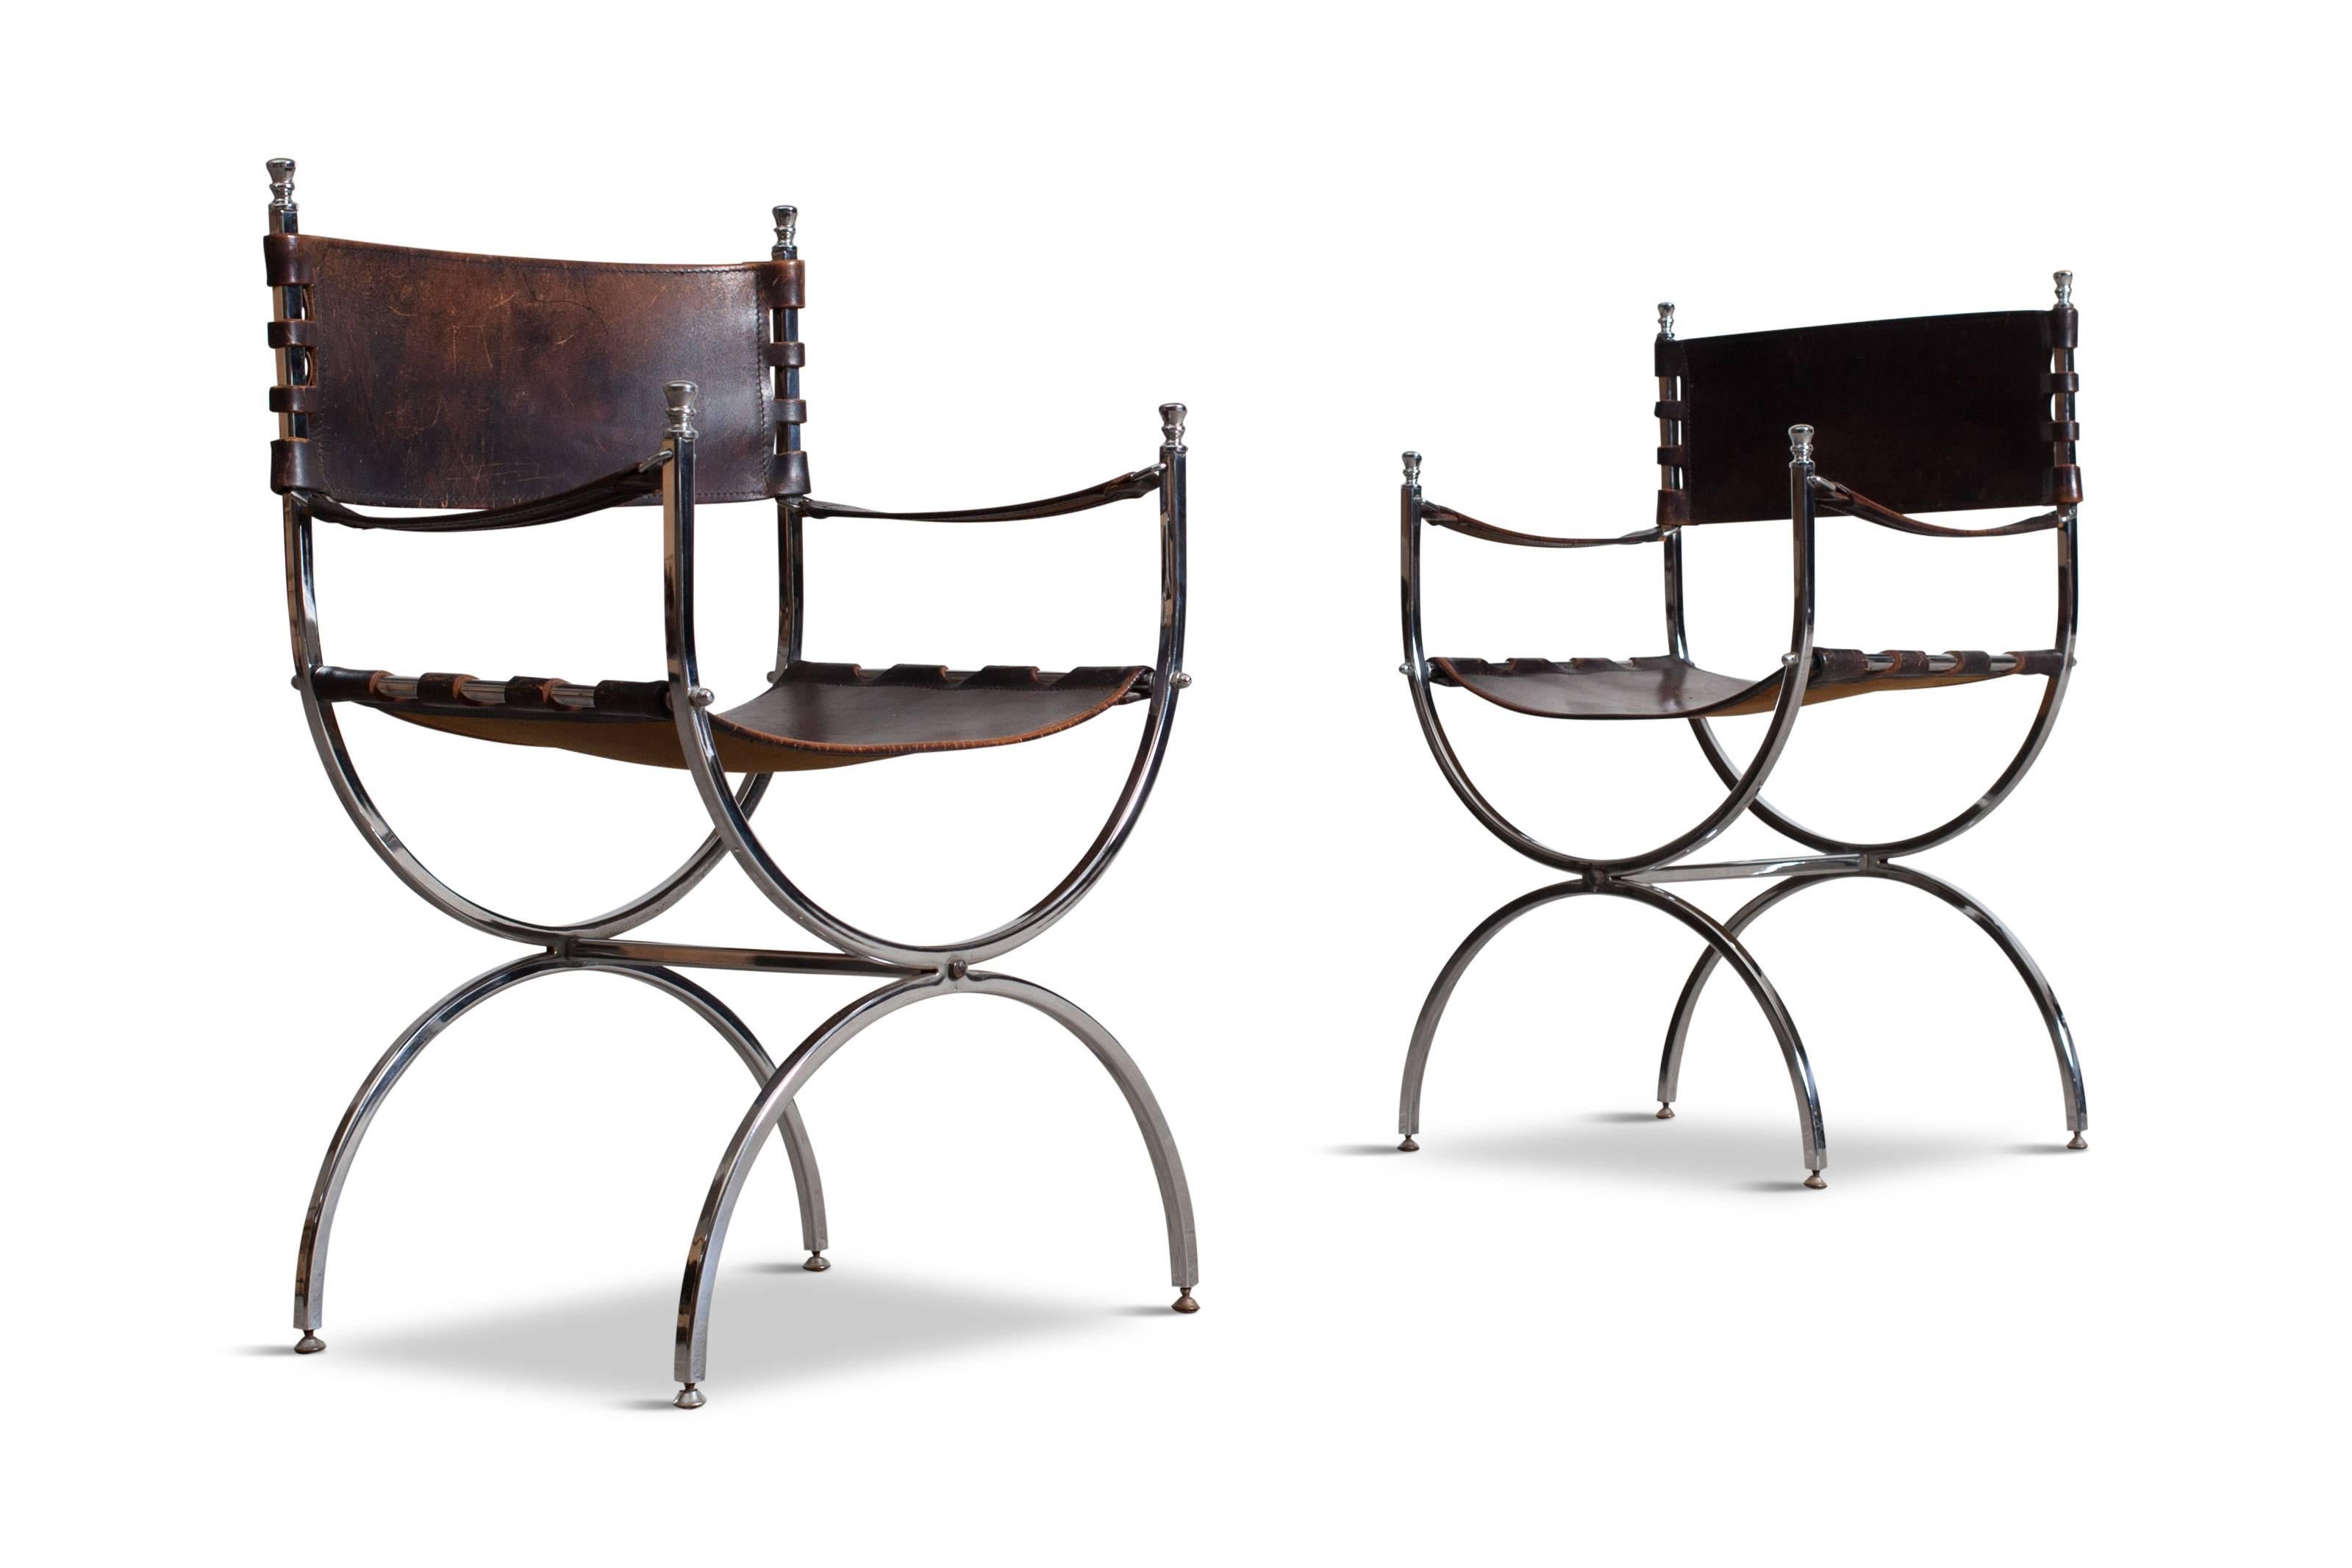 Set of four “Savonarola” Emperor chairs by Maison Jansen, 1970s

Stunning set of four Maison Jansen armchairs consisting of chrome squire tubular frames
and beautifully patinated thick brown leather, seats, back and armrests.

Produced in